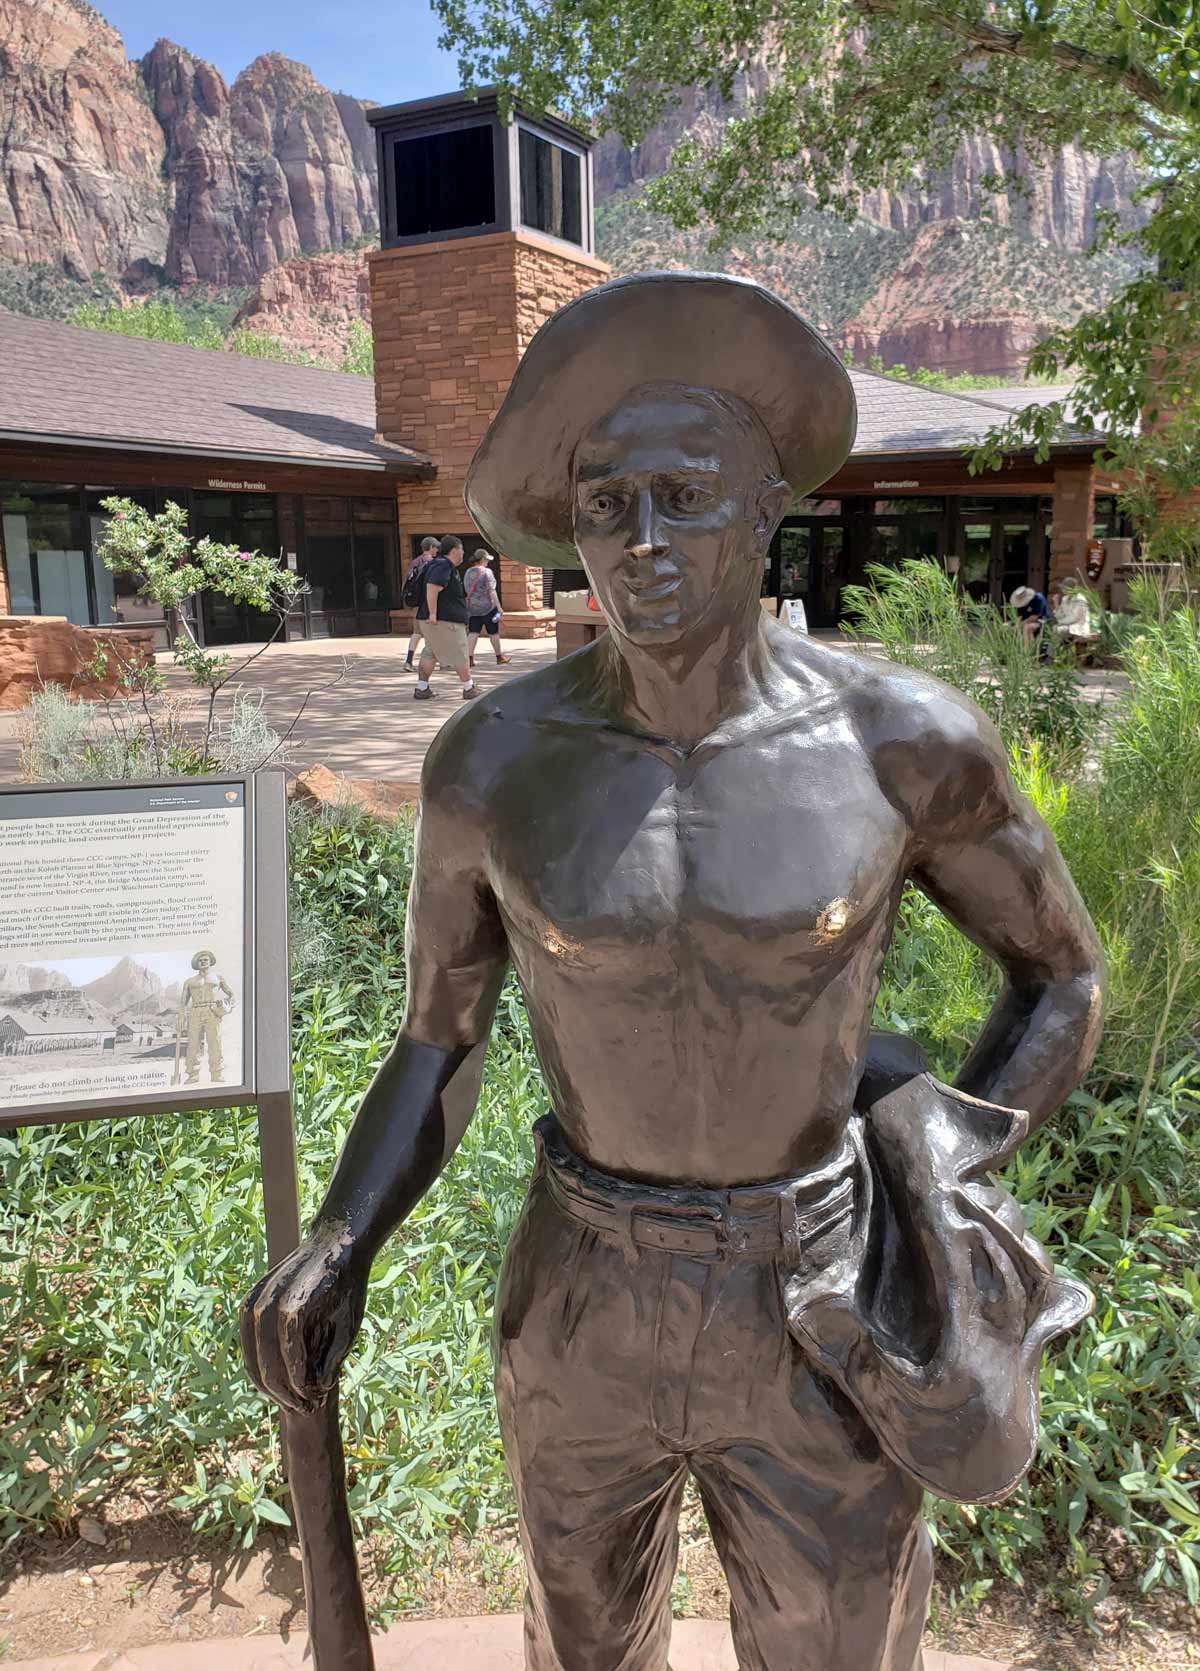 This statue in Zions National Park with shiny nipples from many years of people touching them